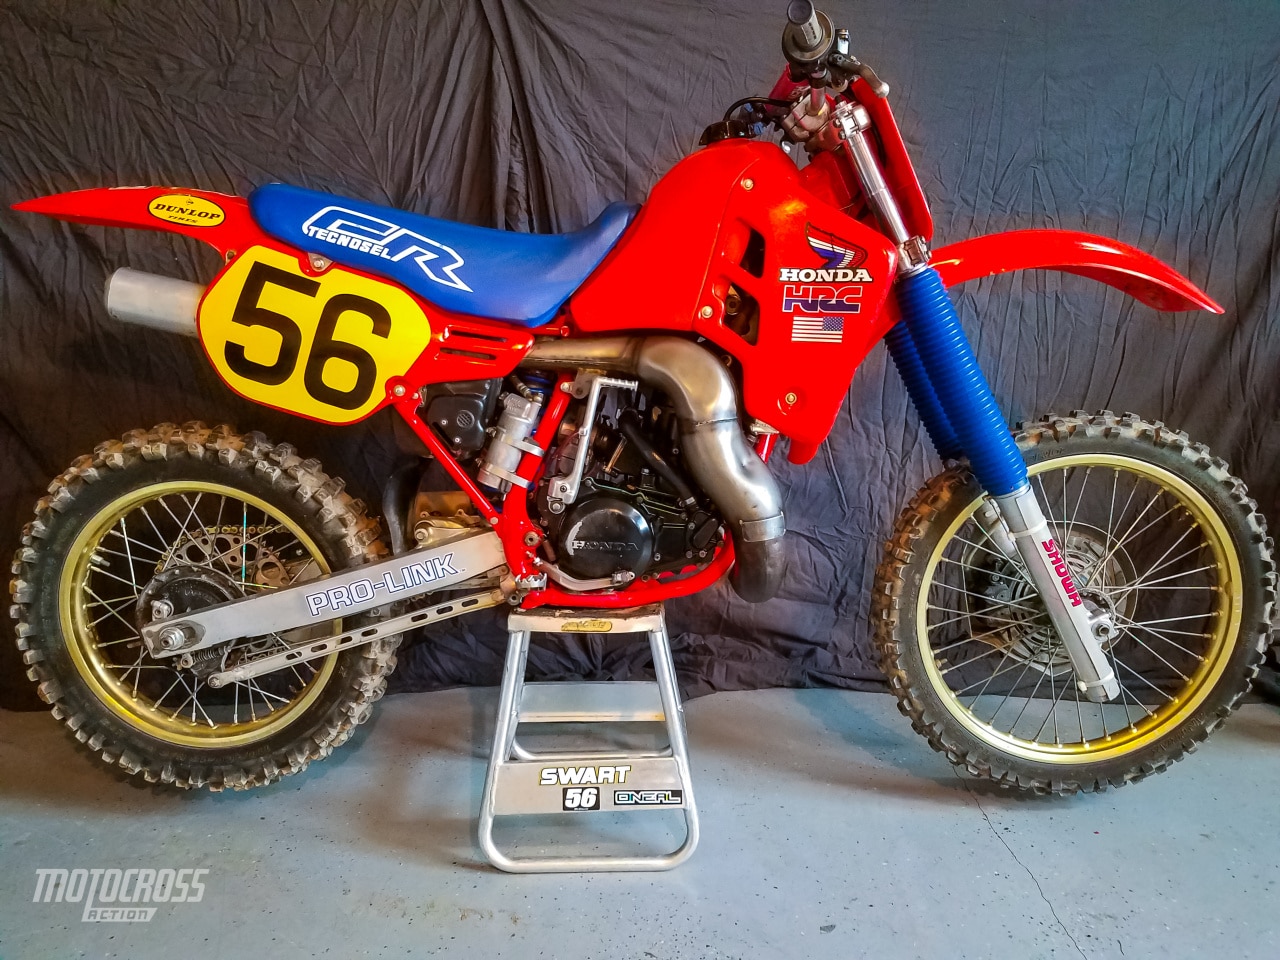 TWO-STROKE TUESDAY 1986 HONDA CR500 FAN SUBMISSION REBUILD - Motocross Acti...